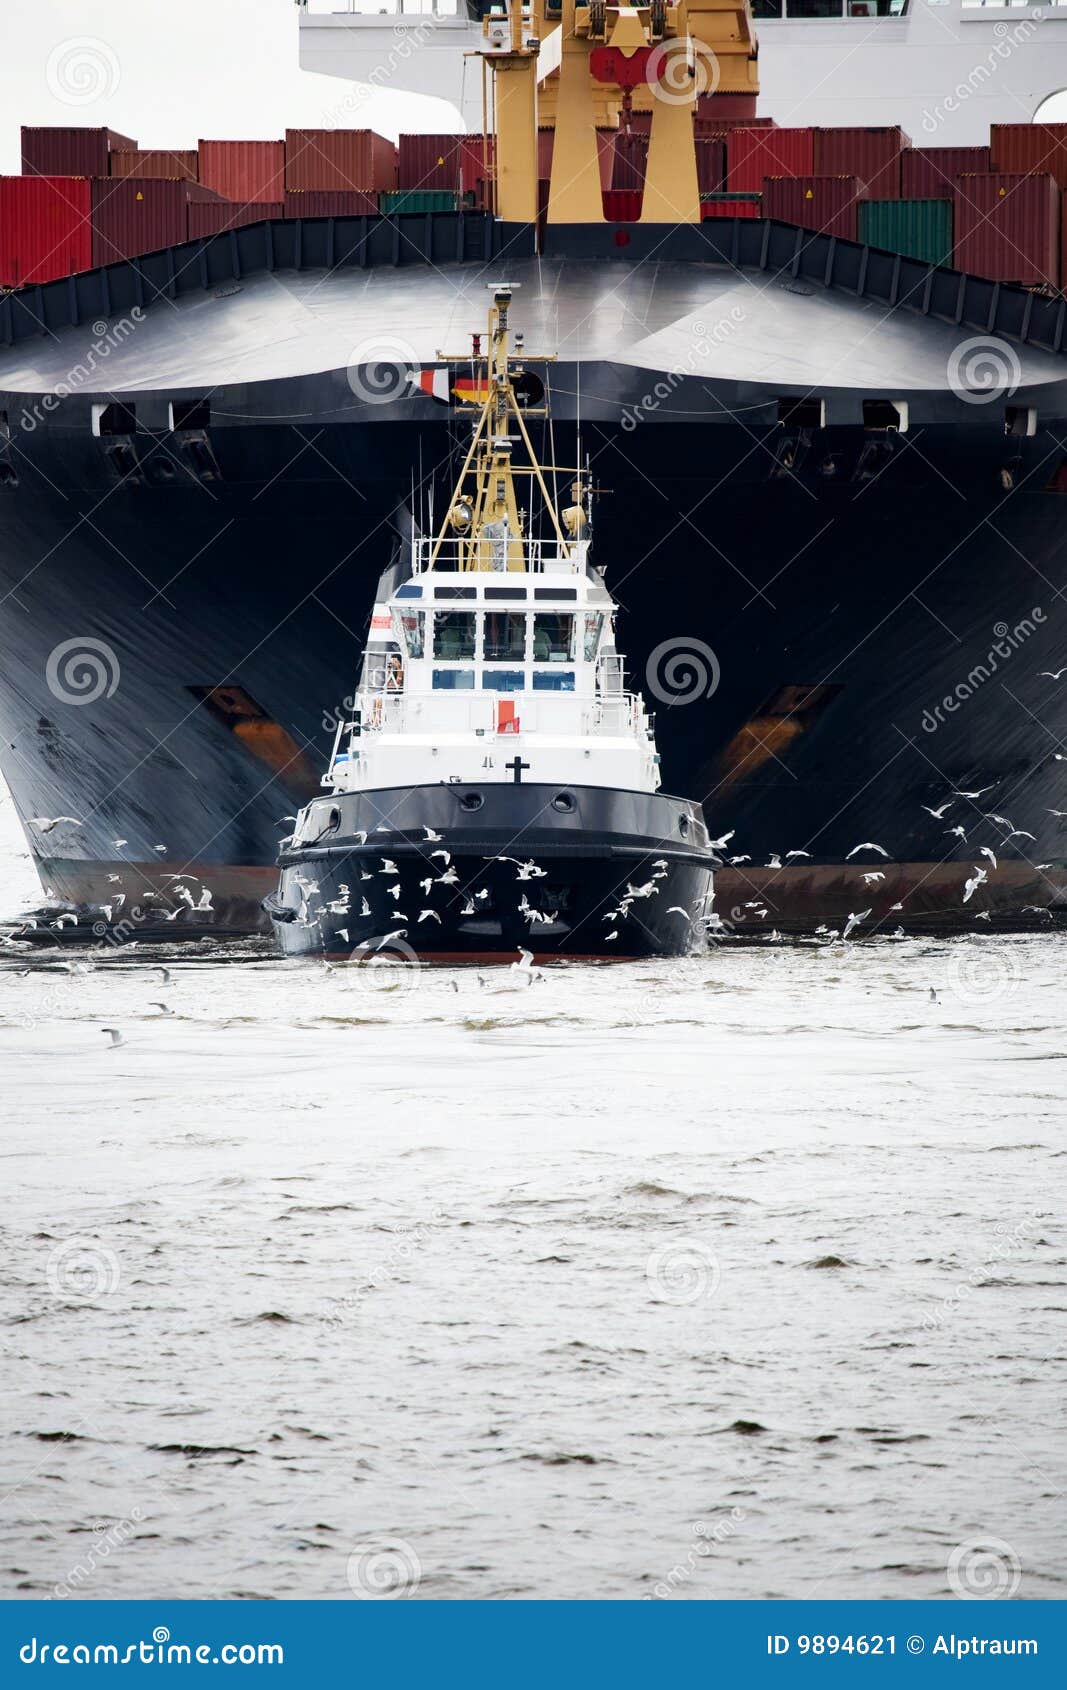 tugboat pulling freighter